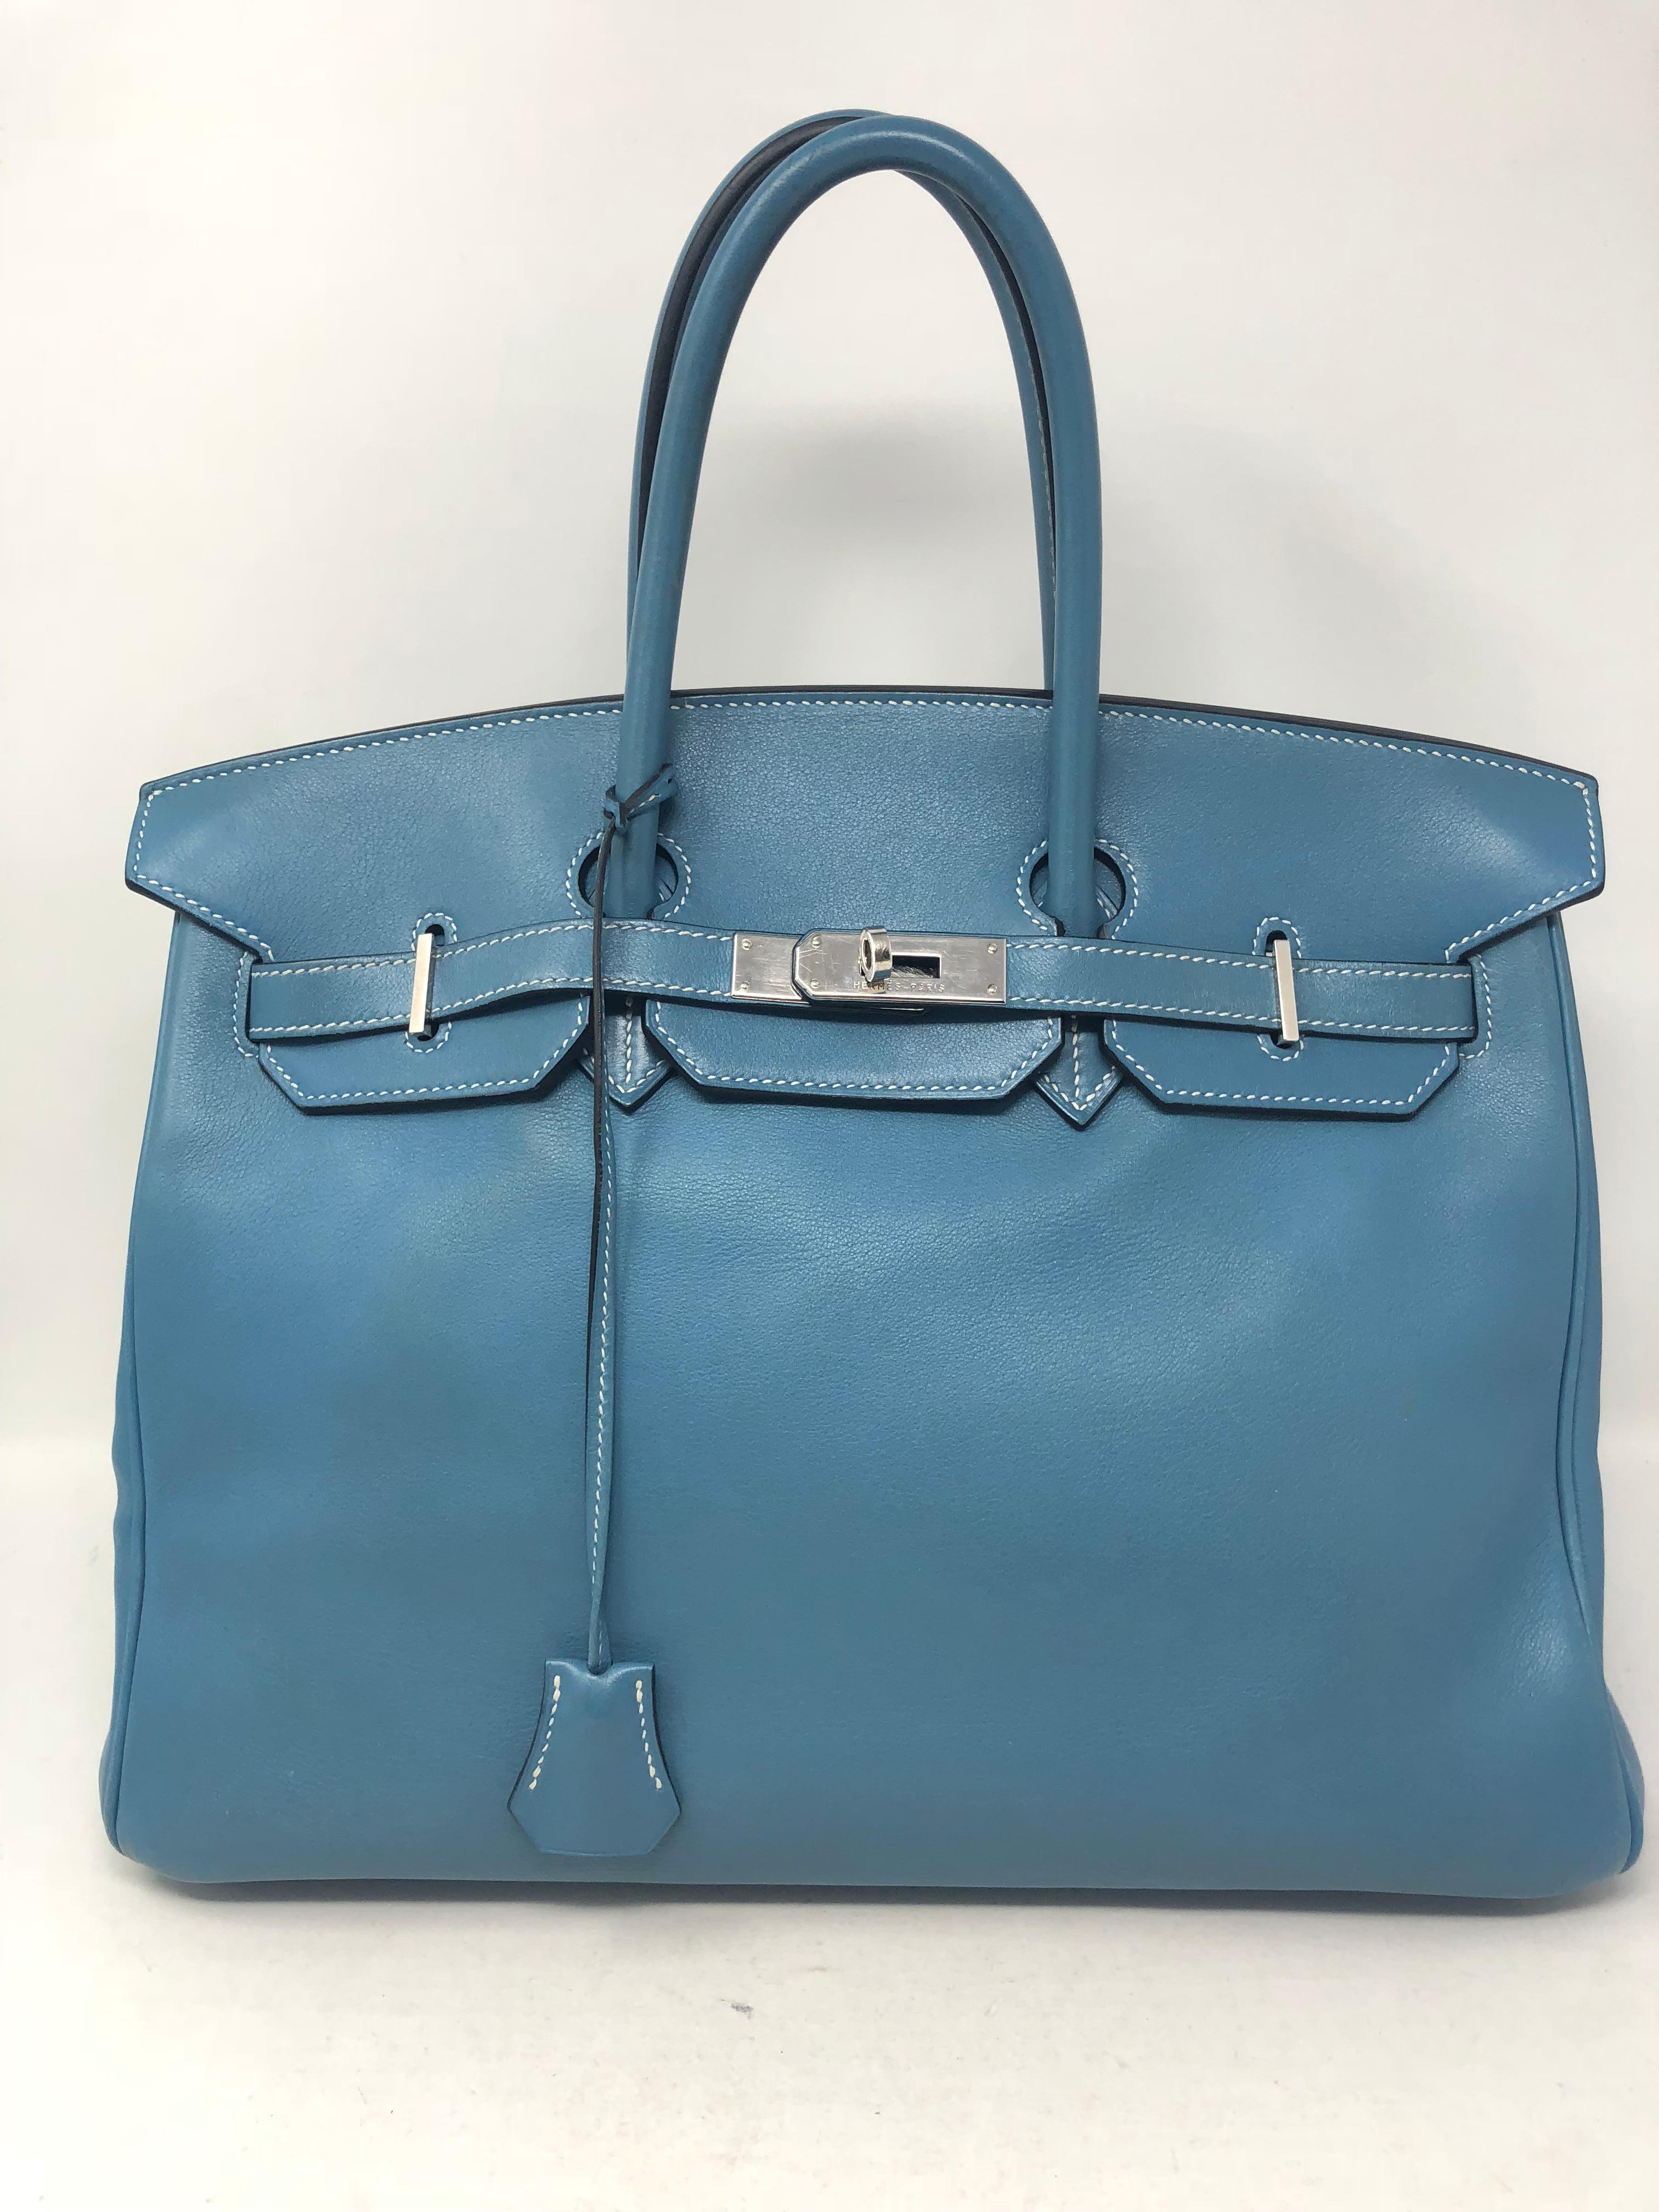 Hermes Birkin 35 Blue Jean with palladium hardware. Pre-loved has some corner wear. Soft swift leather. Light blue color that is a signature Hermes color. Includes dust cover, clochette, lock and keys. Guaranteed authentic. 